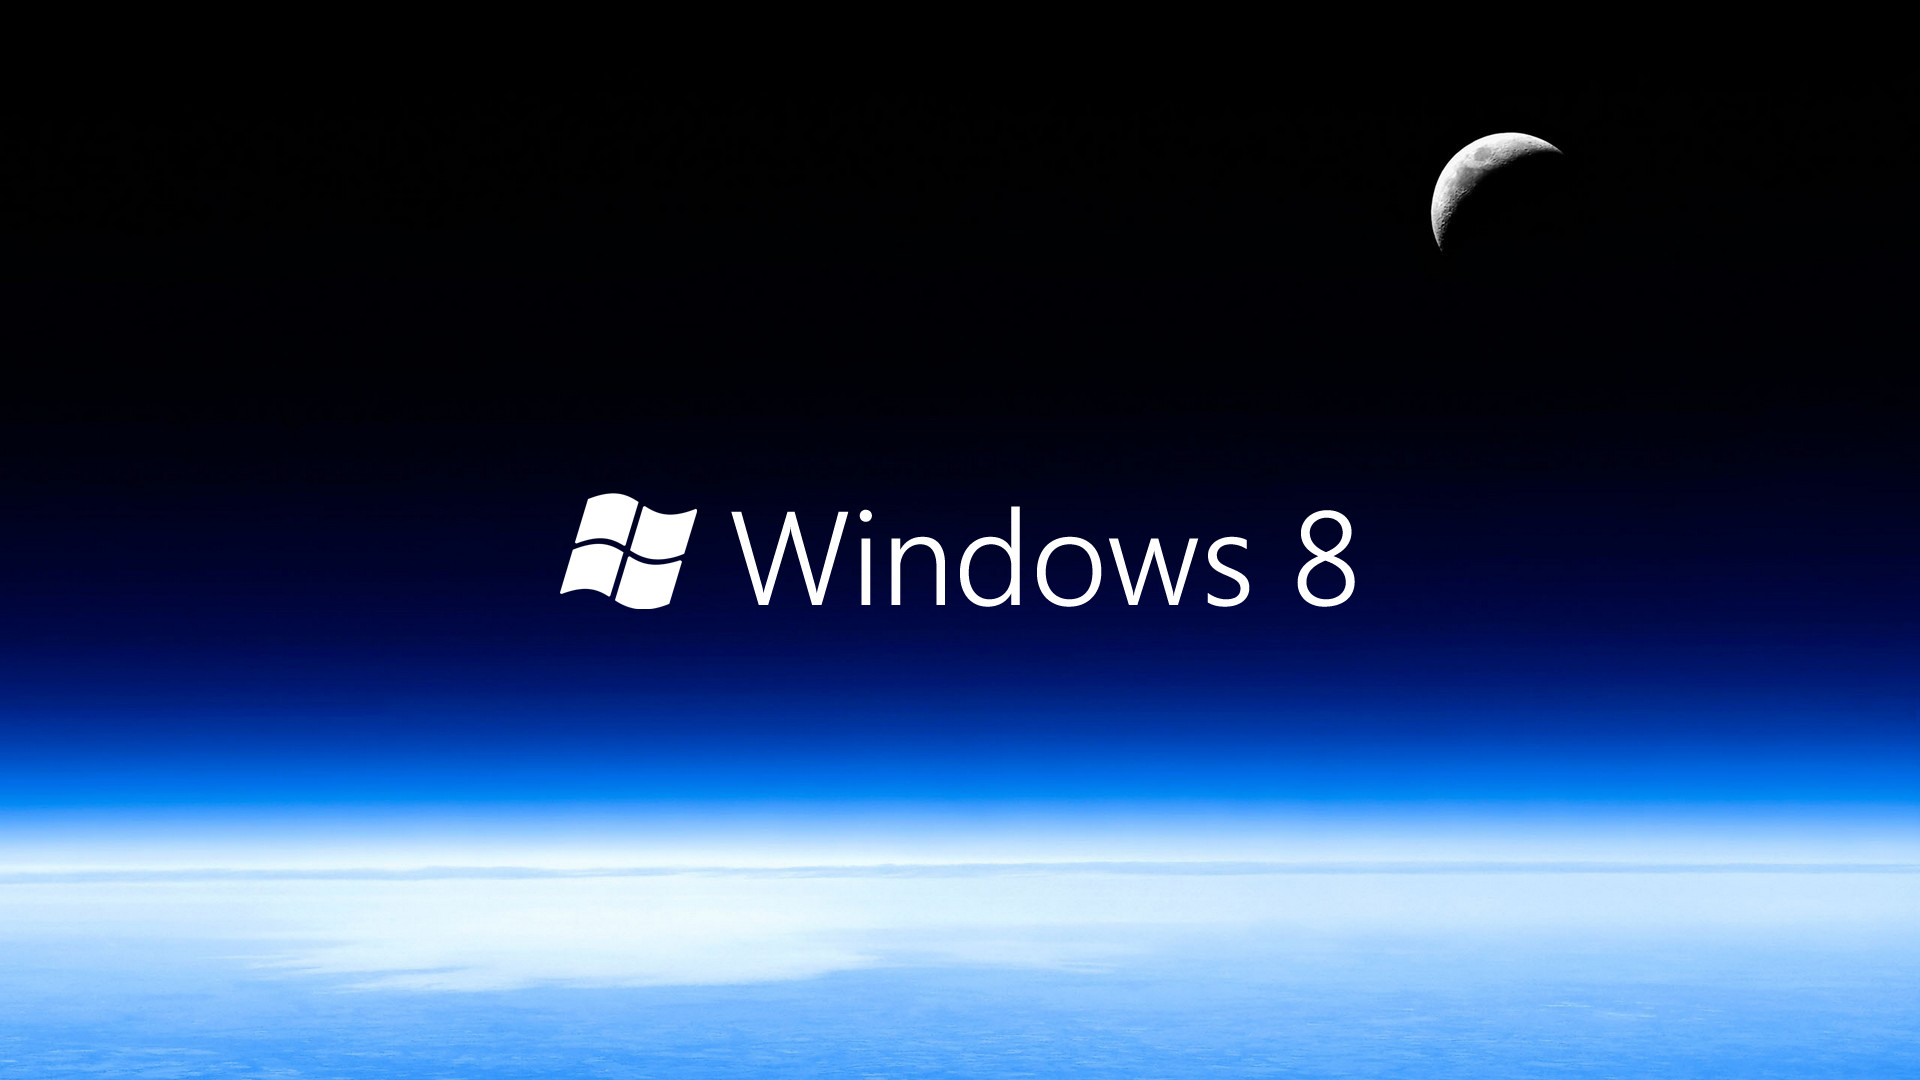 1920x1080 ... BS69: Free Windows 7 Wallpaper Themes, Awesome Windows 7 Themes .